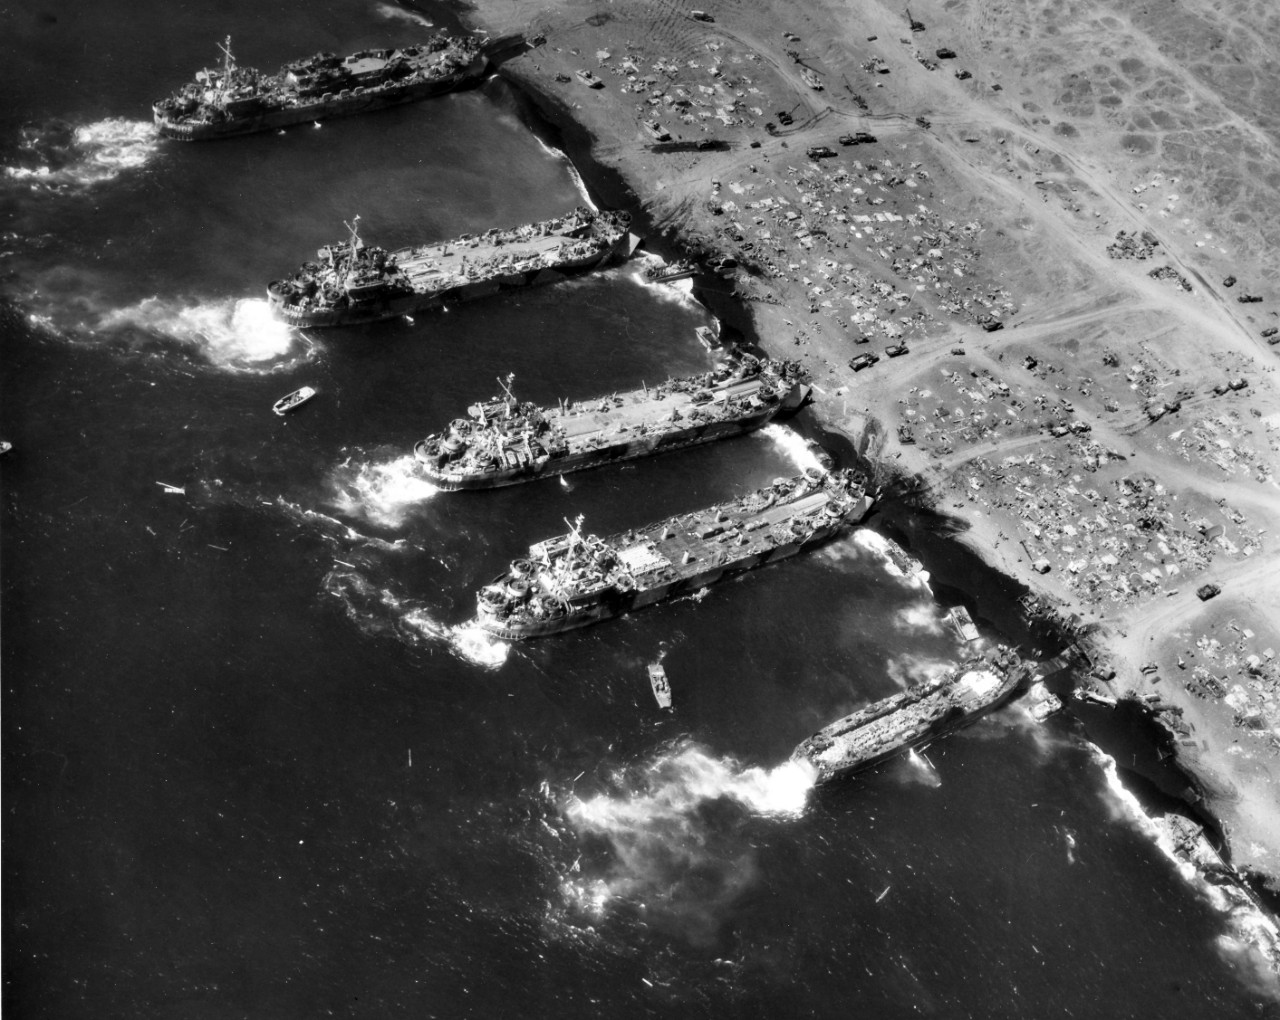 Landing ships unloading near Mt. Suribachi, 25 February 1945. Ships seen include <i>LSM-264</i>, <a href="https://www.history.navy.mil/content/history/nhhc/research/histories/ship-histories/danfs/l/lst-724.html"><i>LST-724</i></a>, <a href="https://www.history.navy.mil/content/history/nhhc/research/histories/ship-histories/danfs/l/lst-760.html"><i>LST-760</i></a>, <a href="https://www.history.navy.mil/content/history/nhhc/research/histories/ship-histories/danfs/l/lst-778.html"><i>LST-788</i></a>, and <a href="https://www.history.navy.mil/content/history/nhhc/research/histories/ship-histories/danfs/l/lst-808.html"><i>LST-808</i></a>. Image is from the Vice Admiral Calvin Durgin Photo Collection.</p>